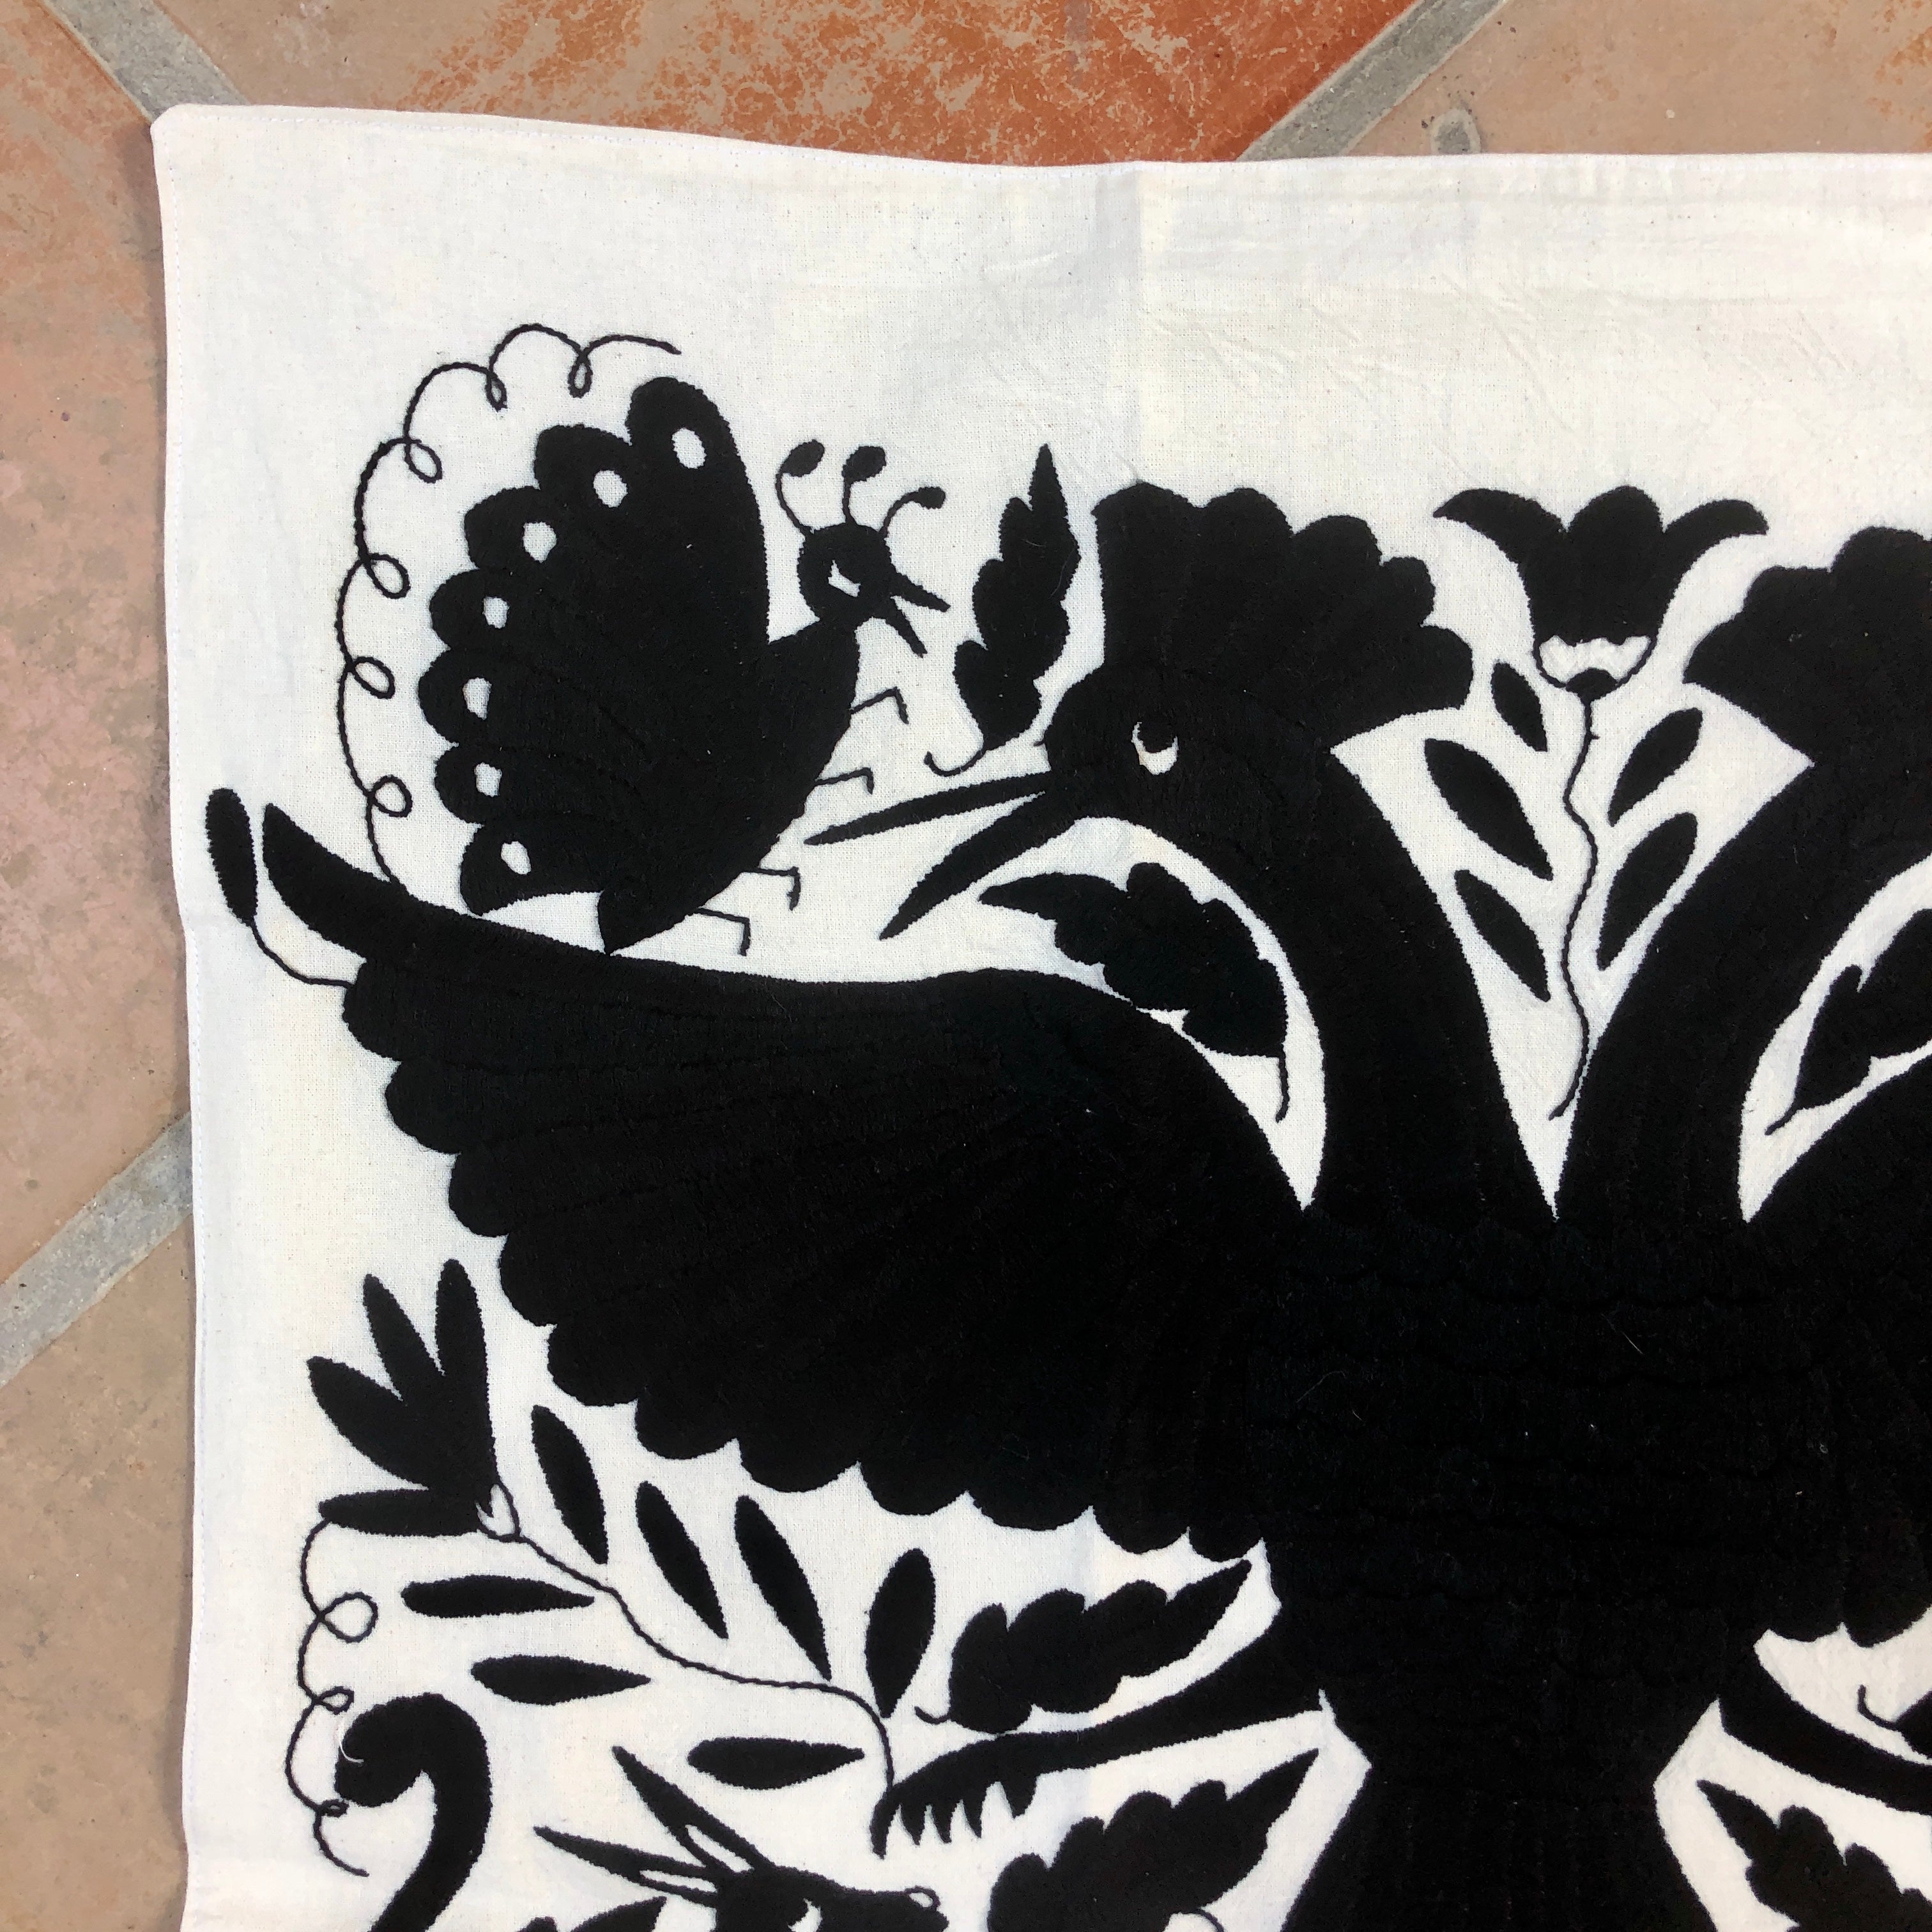 Large Otomi pillow cover -BLACK